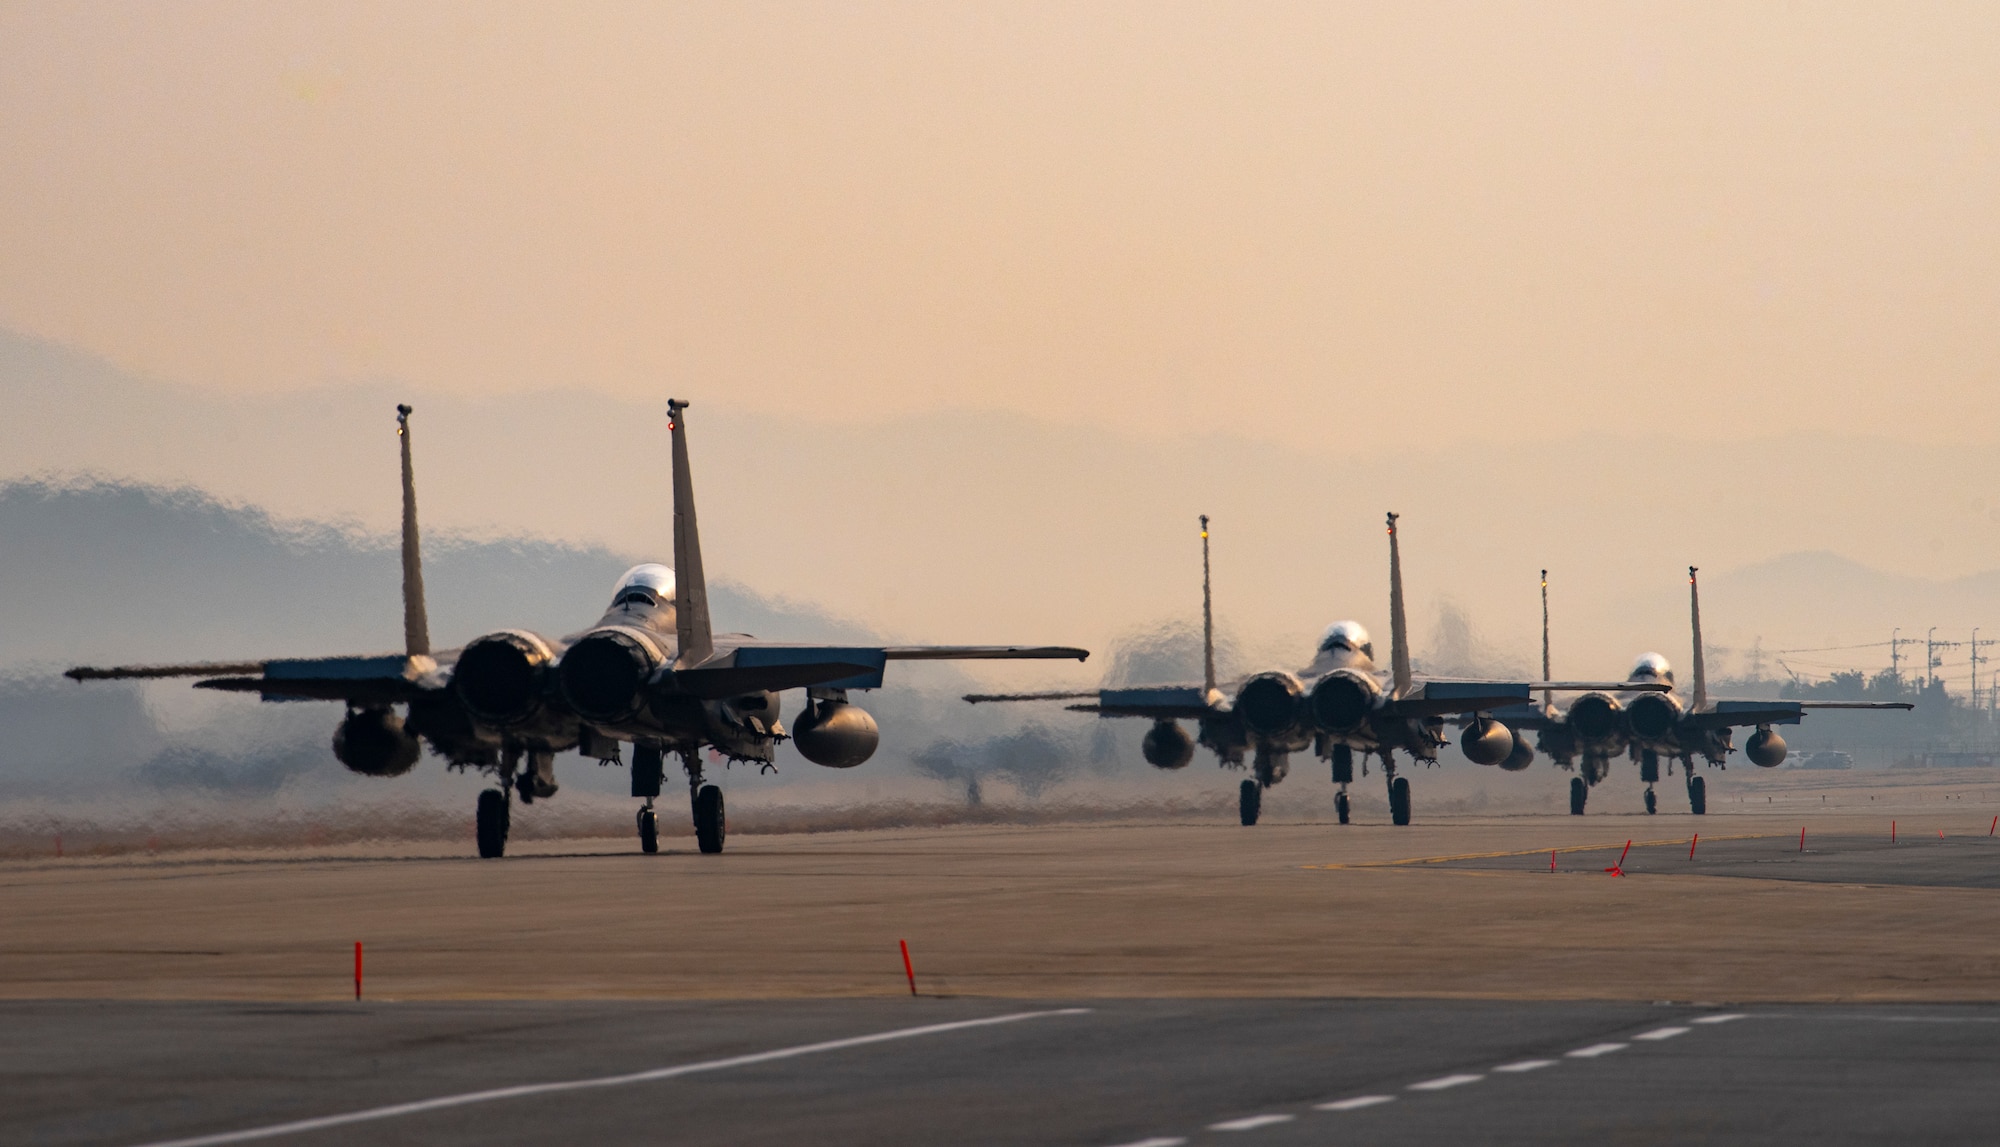 Three Republic of Korea F-15K Slam Eagles assigned to the 102nd Fighter Squadron, taxi on the runway before flight during Buddy Squadron 23-2 at Osan Air Base, Republic of Korea, March 8, 2023.